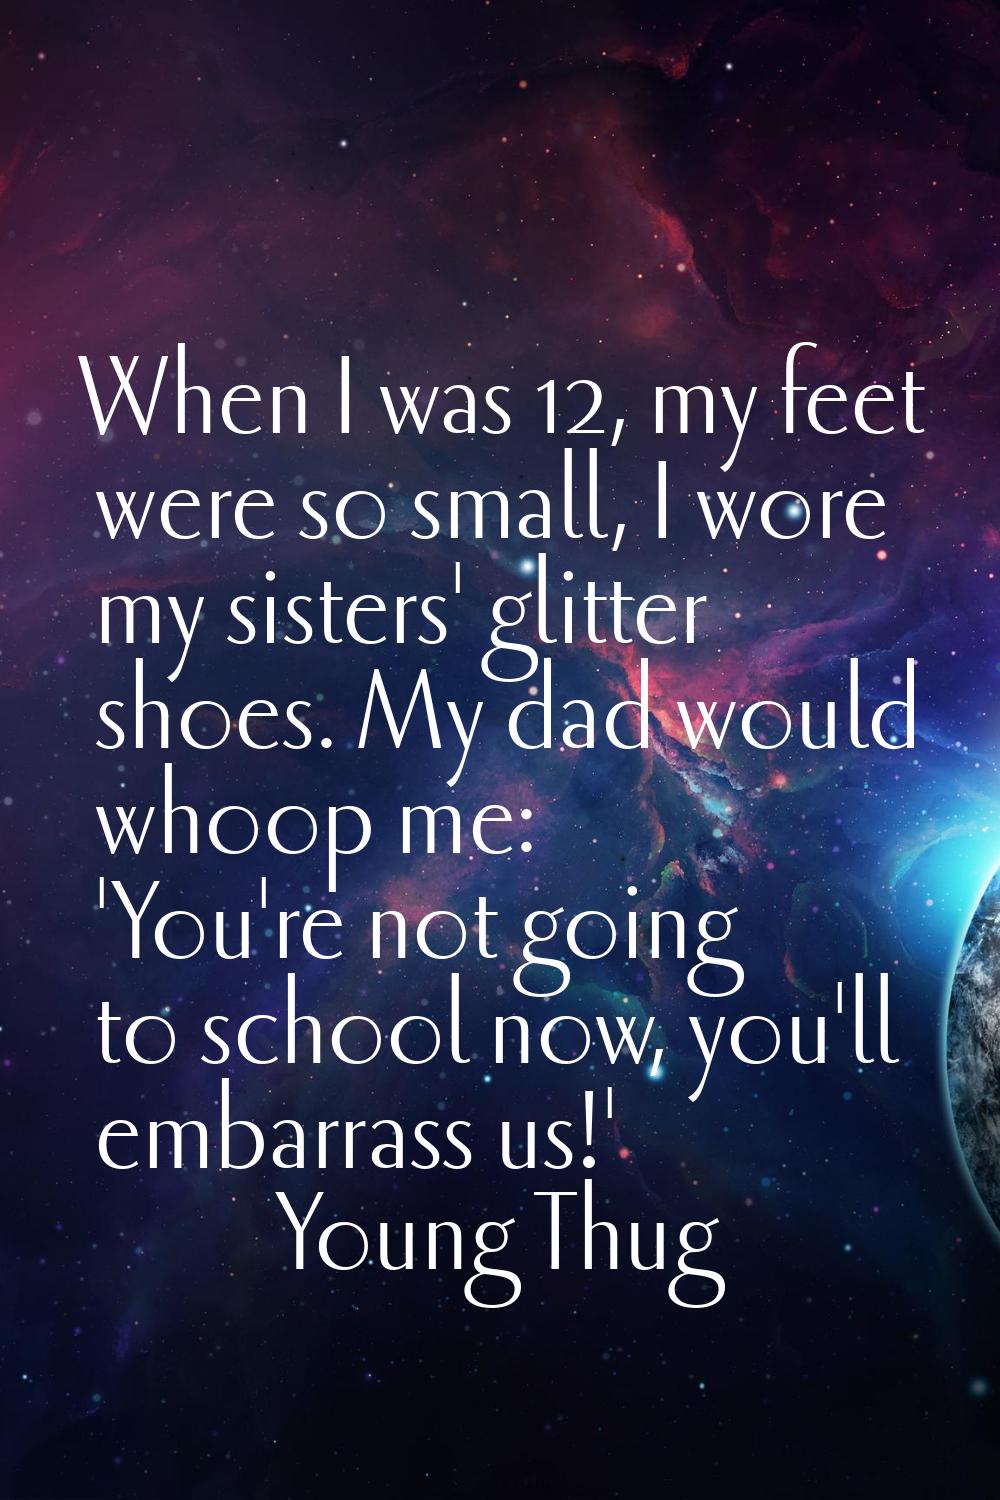 When I was 12, my feet were so small, I wore my sisters' glitter shoes. My dad would whoop me: 'You